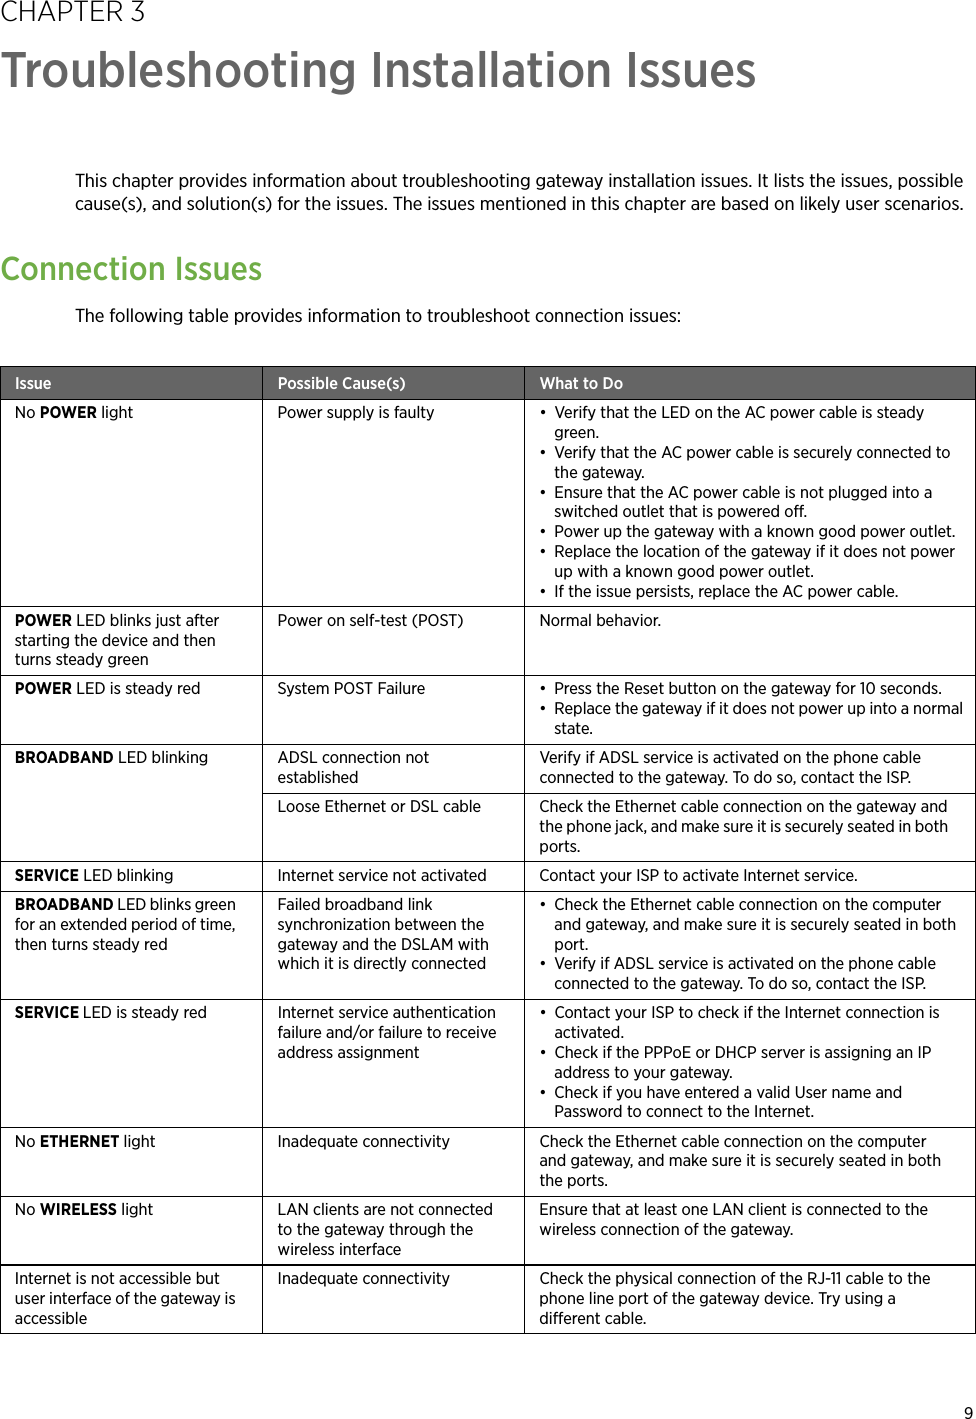 9CHAPTER 3Troubleshooting Installation IssuesThis chapter provides information about troubleshooting gateway installation issues. It lists the issues, possible cause(s), and solution(s) for the issues. The issues mentioned in this chapter are based on likely user scenarios.Connection IssuesThe following table provides information to troubleshoot connection issues:Issue Possible Cause(s) What to DoNo POWER light Power supply is faulty • Verify that the LED on the AC power cable is steady green.• Verify that the AC power cable is securely connected to the gateway.• Ensure that the AC power cable is not plugged into a switched outlet that is powered off.• Power up the gateway with a known good power outlet.• Replace the location of the gateway if it does not power up with a known good power outlet.• If the issue persists, replace the AC power cable.POWER LED blinks just after starting the device and then turns steady greenPower on self-test (POST) Normal behavior.POWER LED is steady red System POST Failure • Press the Reset button on the gateway for 10 seconds.• Replace the gateway if it does not power up into a normal state.BROADBAND LED blinking ADSL connection not establishedVerify if ADSL service is activated on the phone cable connected to the gateway. To do so, contact the ISP.Loose Ethernet or DSL cable Check the Ethernet cable connection on the gateway and the phone jack, and make sure it is securely seated in both ports.SERVICE LED blinking Internet service not activated Contact your ISP to activate Internet service.BROADBAND LED blinks green for an extended period of time, then turns steady redFailed broadband link synchronization between the gateway and the DSLAM with which it is directly connected• Check the Ethernet cable connection on the computer and gateway, and make sure it is securely seated in both port.• Verify if ADSL service is activated on the phone cable connected to the gateway. To do so, contact the ISP.SERVICE LED is steady red Internet service authentication failure and/or failure to receive address assignment• Contact your ISP to check if the Internet connection is activated.• Check if the PPPoE or DHCP server is assigning an IP address to your gateway.• Check if you have entered a valid User name and Password to connect to the Internet.No ETHERNET light Inadequate connectivity Check the Ethernet cable connection on the computer and gateway, and make sure it is securely seated in both the ports.No WIRELESS light LAN clients are not connected to the gateway through the wireless interfaceEnsure that at least one LAN client is connected to the wireless connection of the gateway.Internet is not accessible but user interface of the gateway is accessibleInadequate connectivity Check the physical connection of the RJ-11 cable to the phone line port of the gateway device. Try using a different cable.